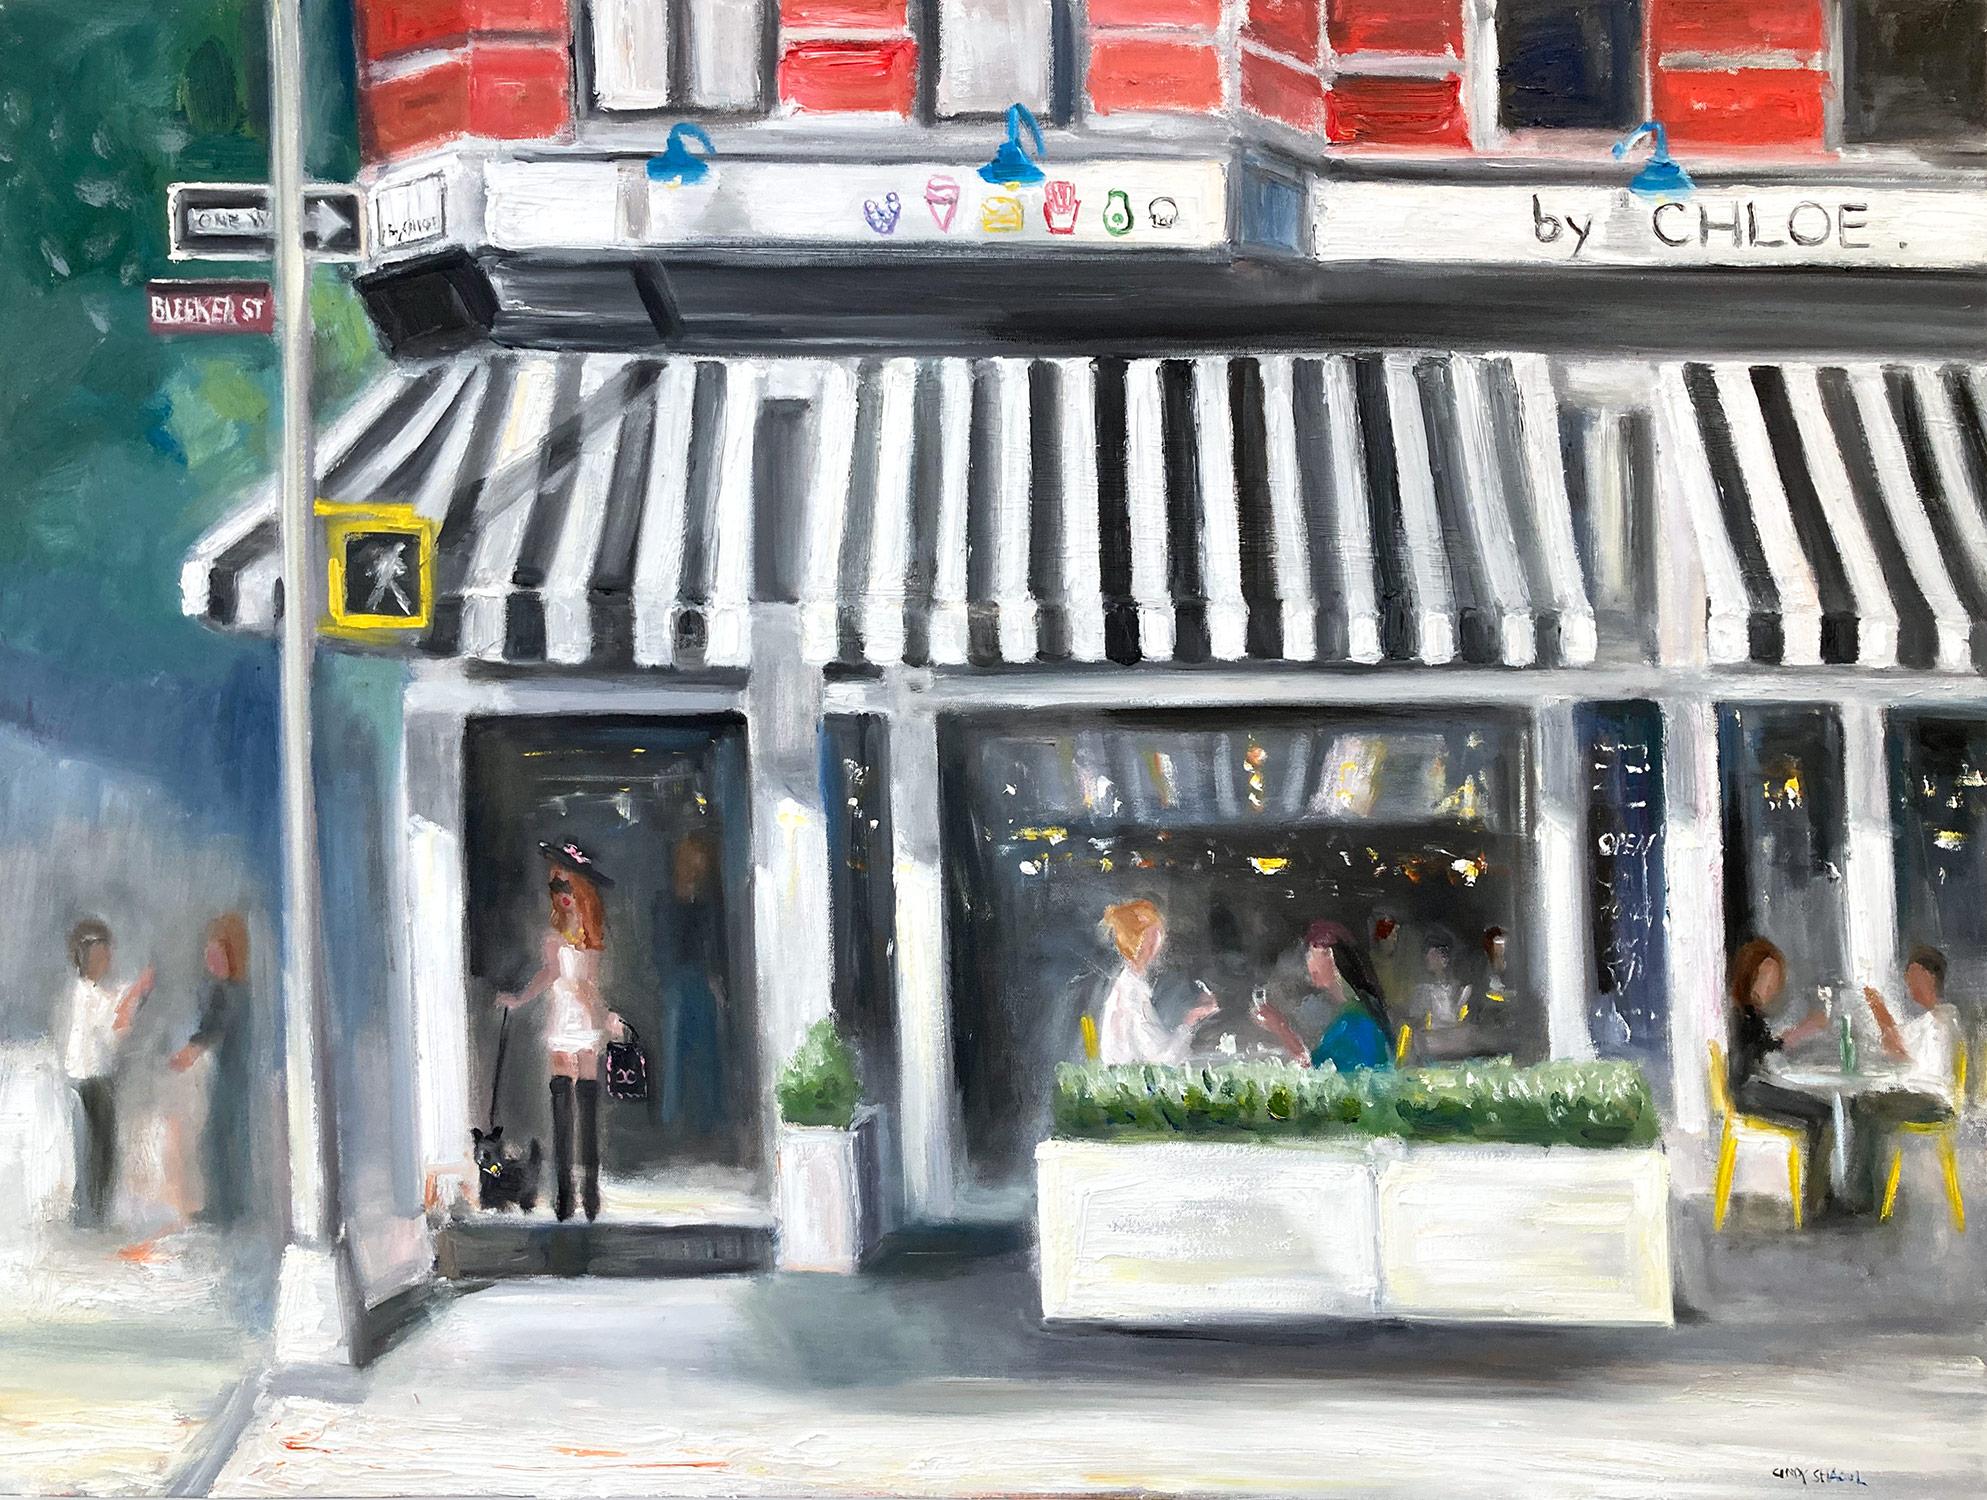 Cindy Shaoul Figurative Painting - "Brunch By Chloe NYC Bleecker St" Impressionistic Scene Oil Painting on Canvas